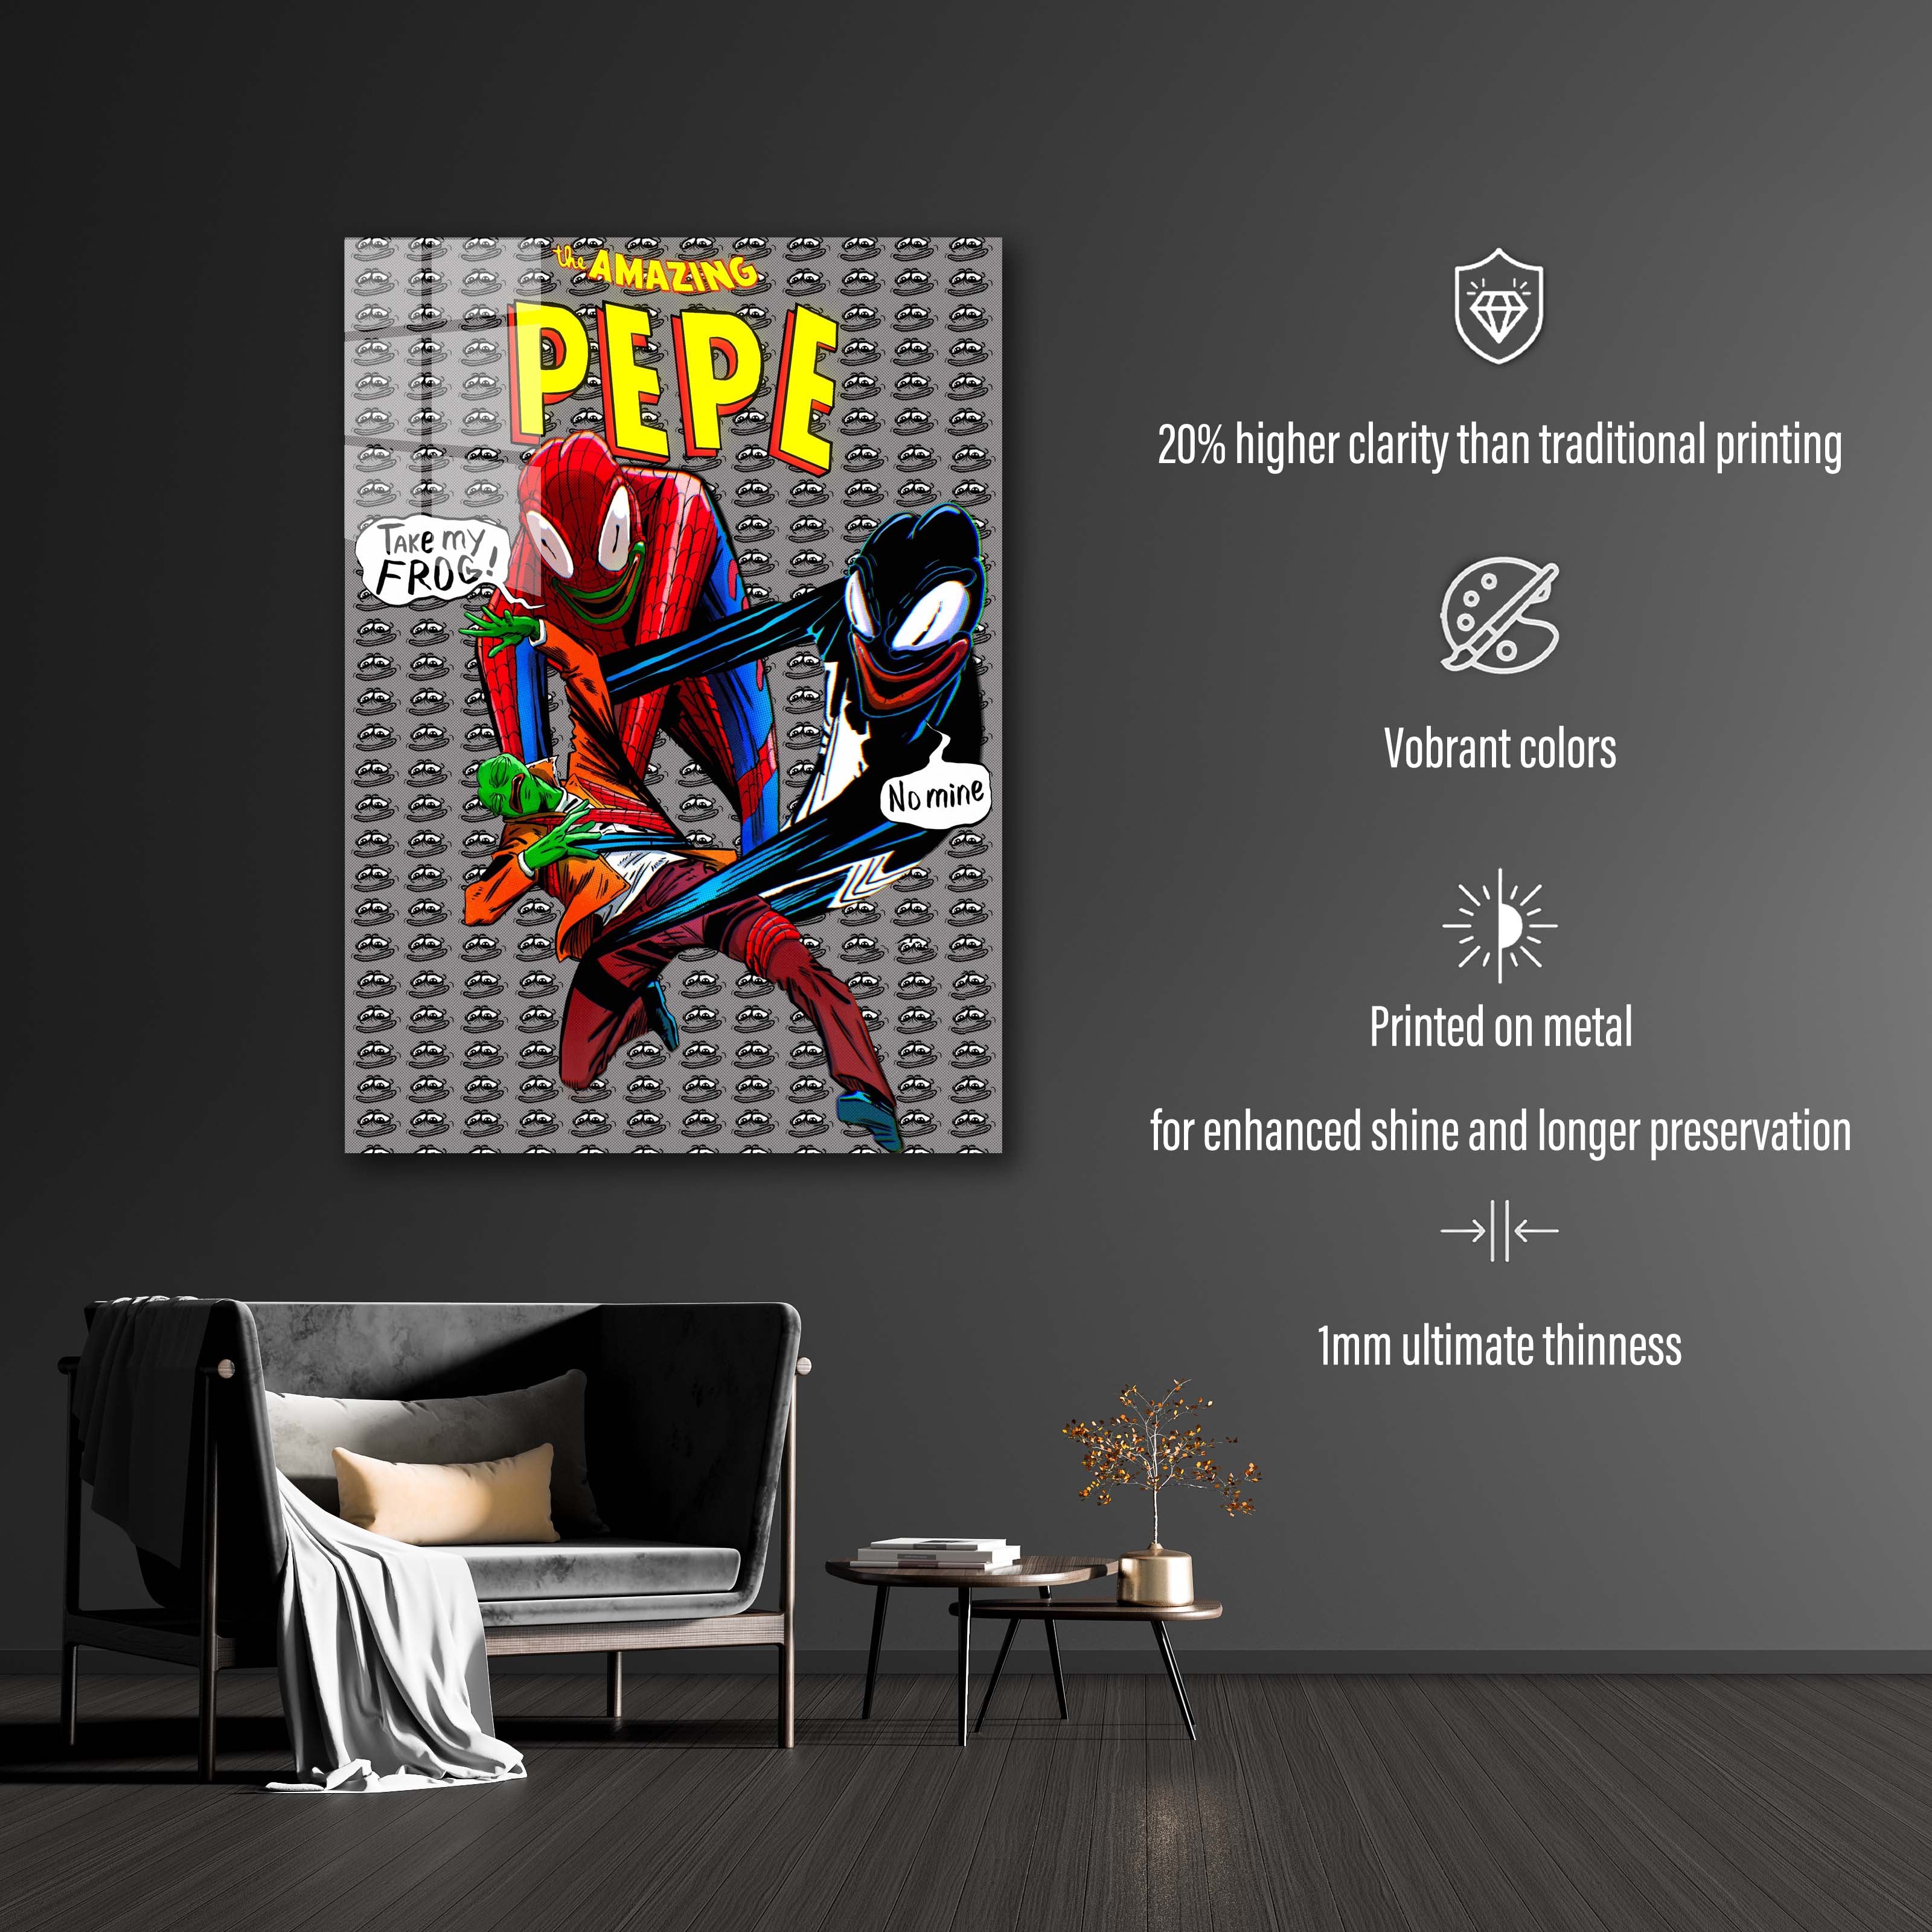 The Amazing Peps-designed by @My Kido Art